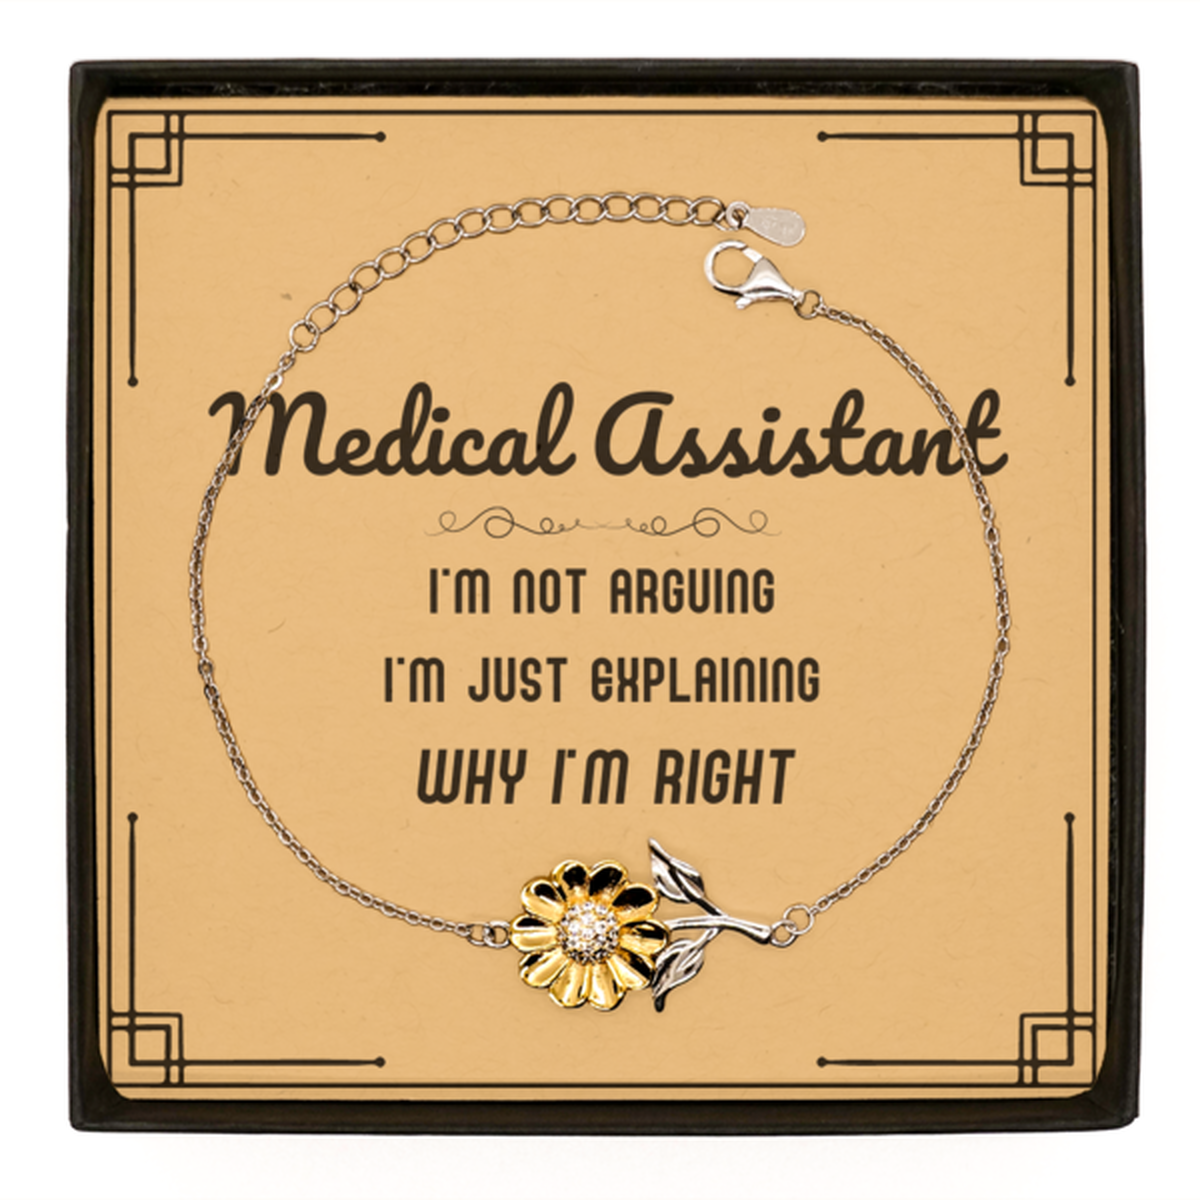 Medical Assistant I'm not Arguing. I'm Just Explaining Why I'm RIGHT Sunflower Bracelet, Funny Saying Quote Medical Assistant Gifts For Medical Assistant Message Card Graduation Birthday Christmas Gifts for Men Women Coworker